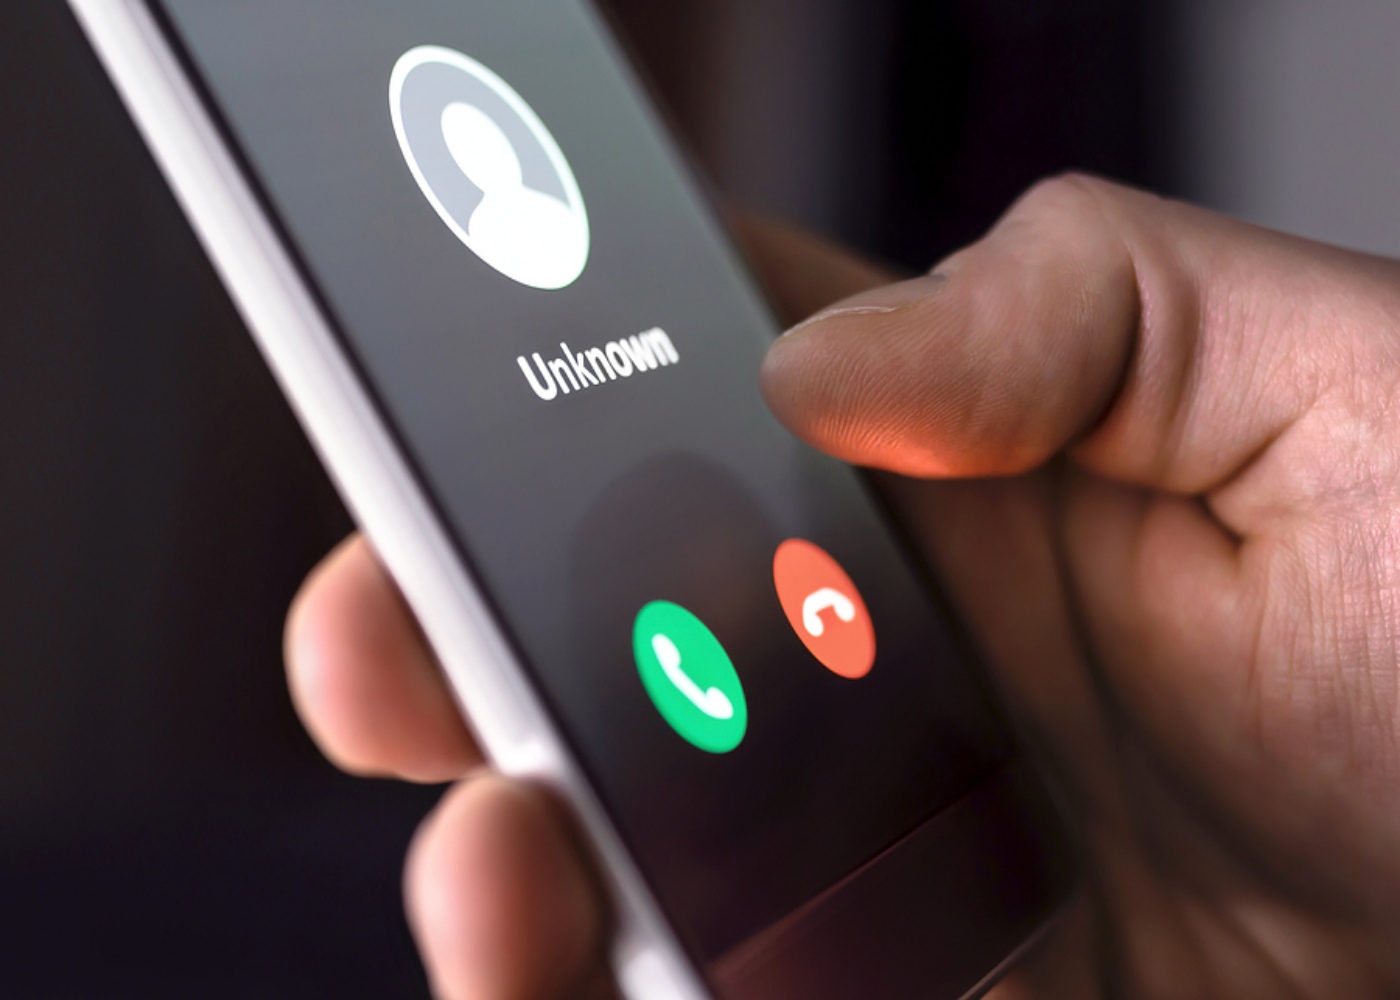 How to Use WhatsApp Call in the UAE